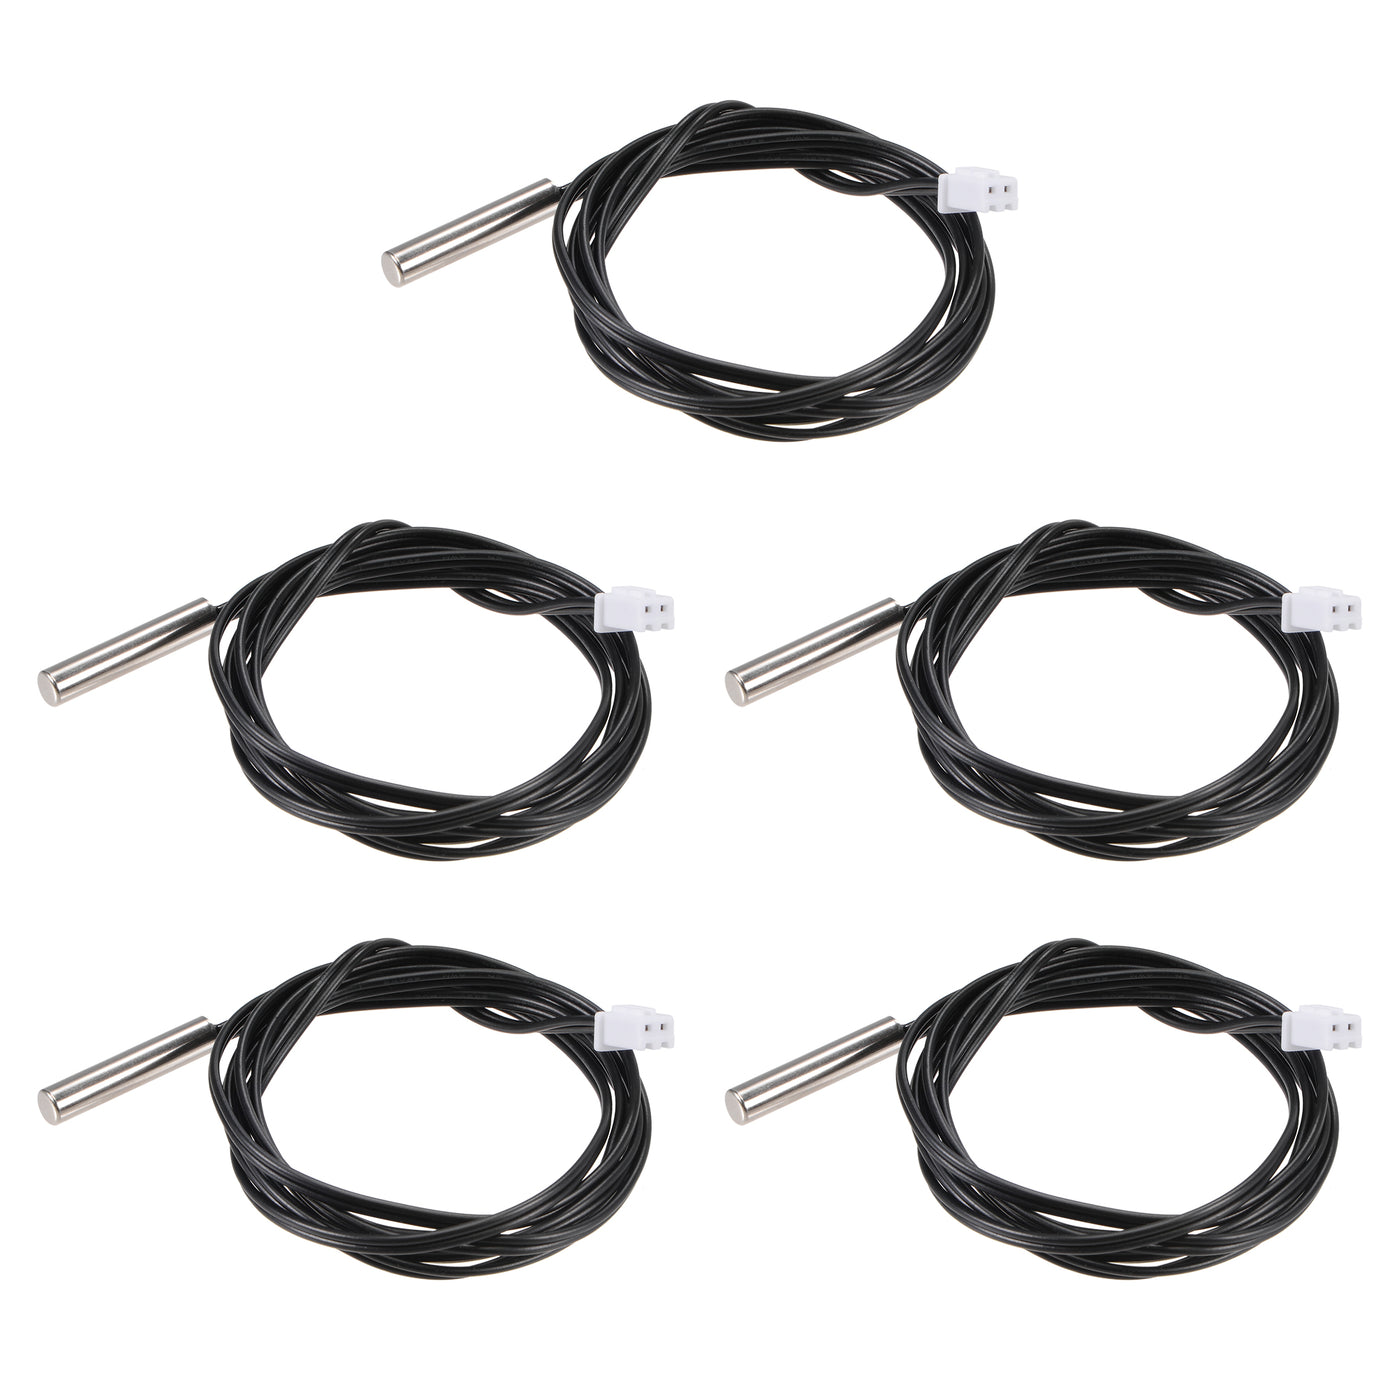 uxcell Uxcell 5pcs 15K Temperature Sensor Probe, Stainless Steel NTC Thermal Sensor Probe 3.3ft Digital Thermometer Extension Cable